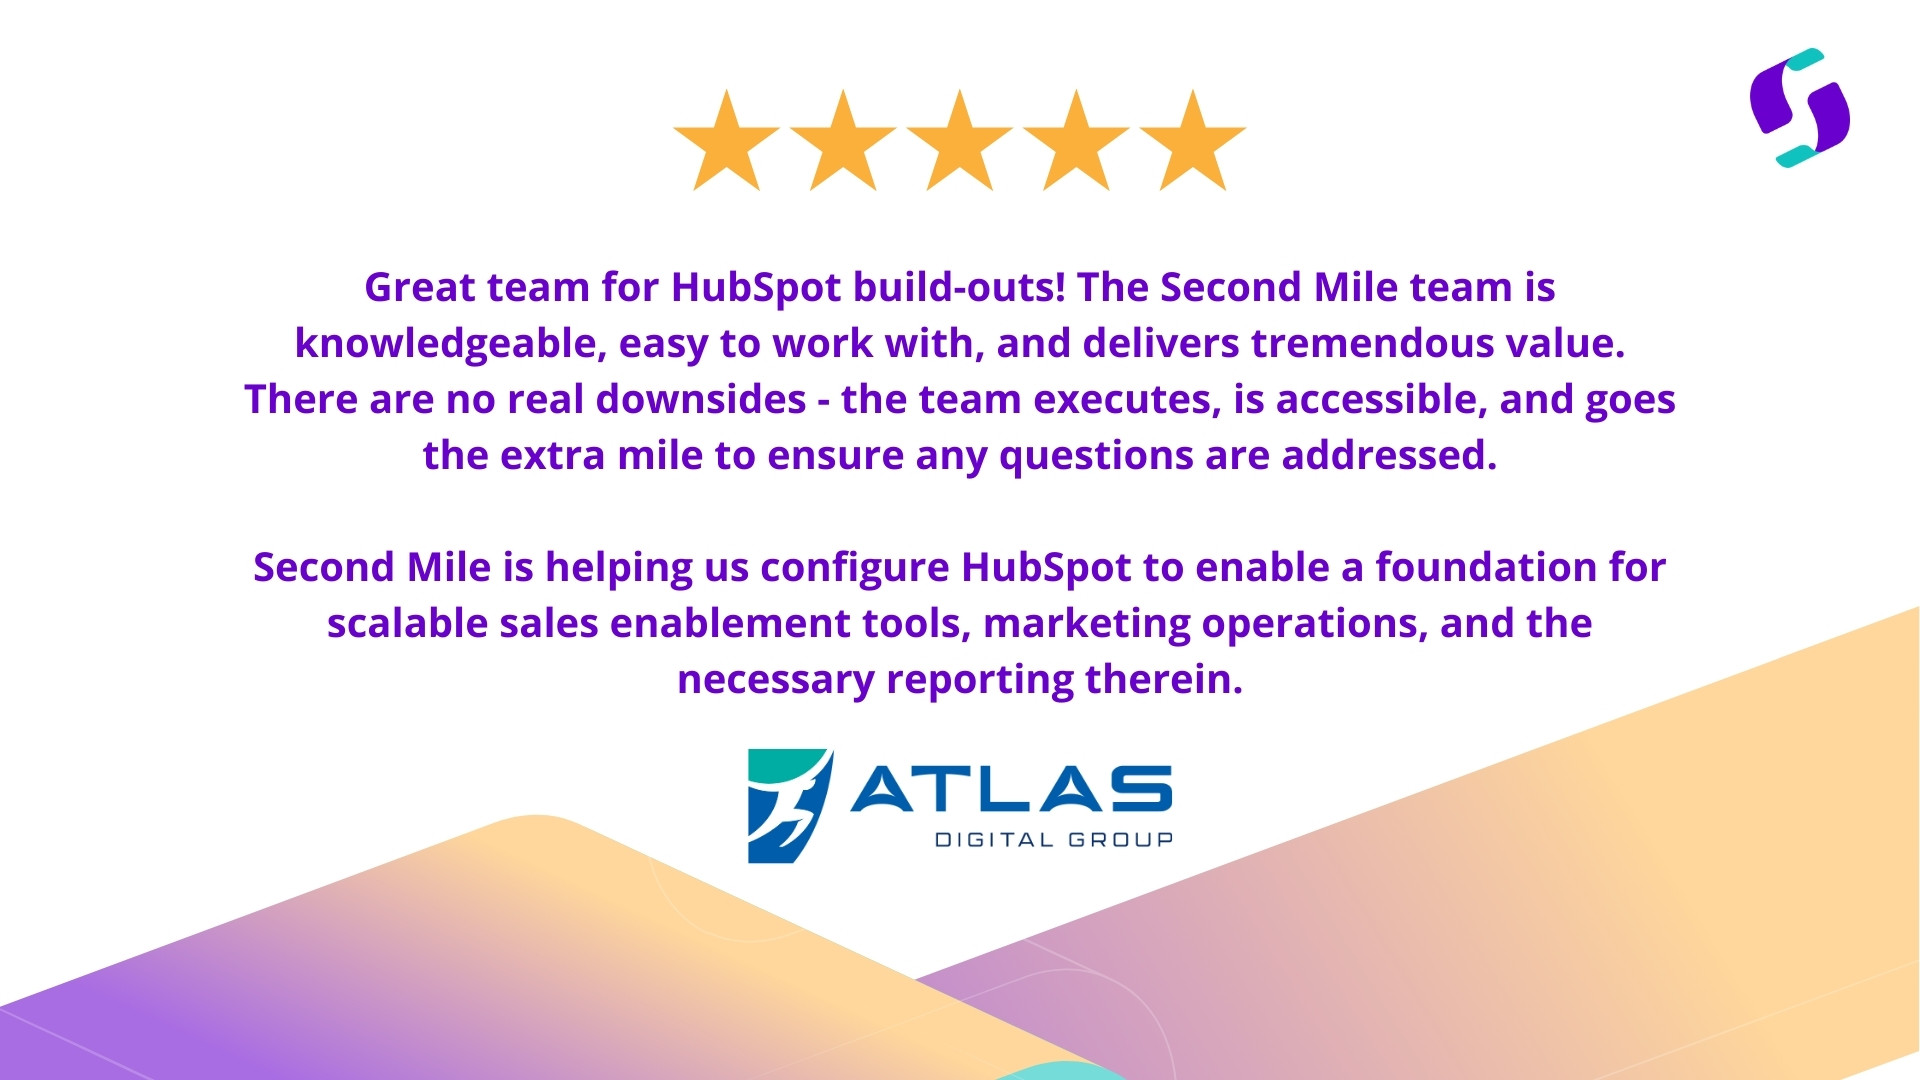 Altlas Quote about second mile 5 stars